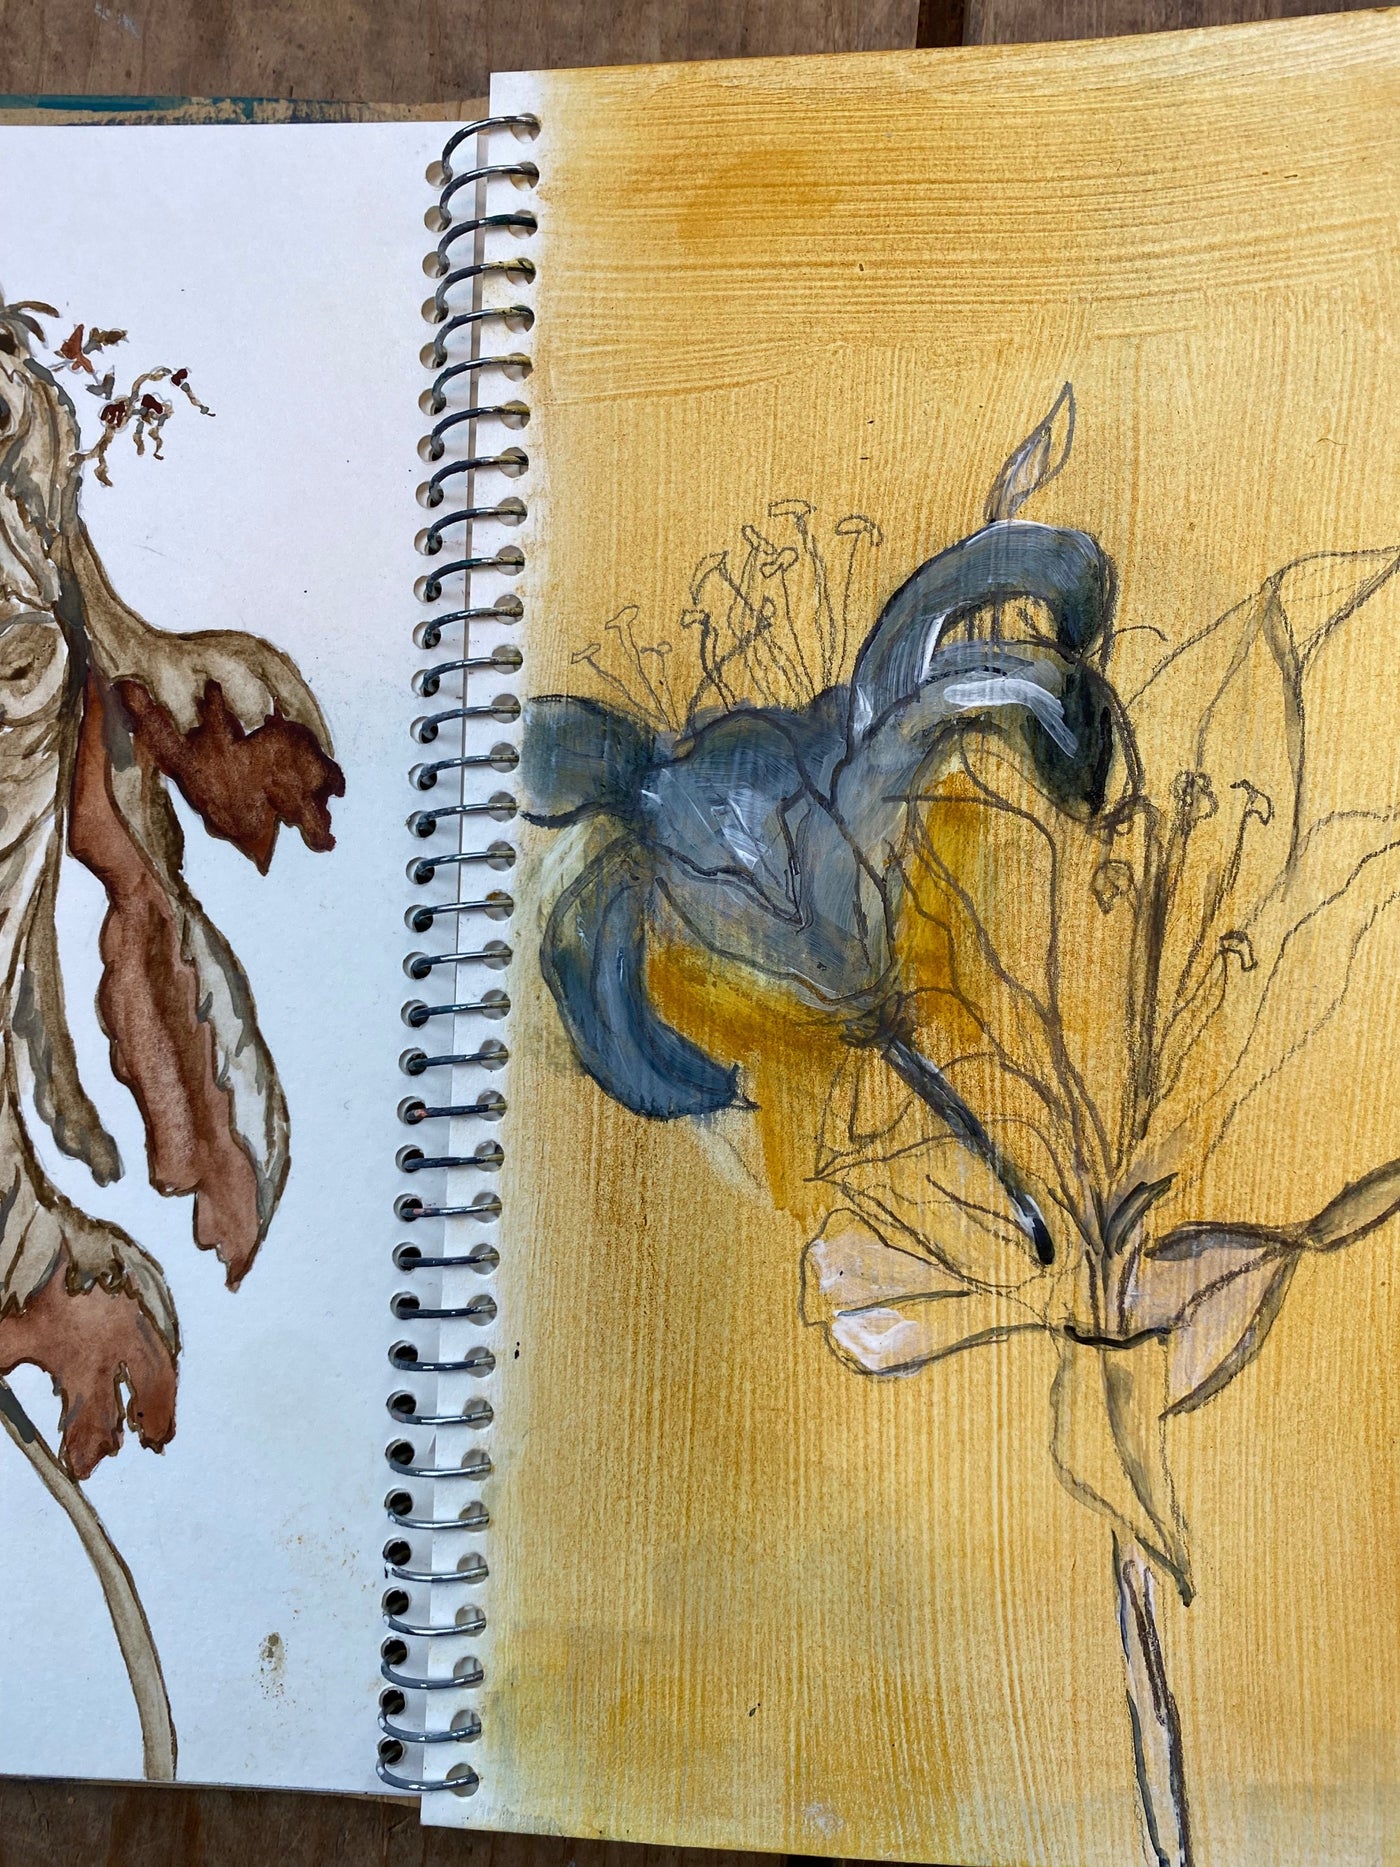 Floral sketches in an artist's daily sketchbook